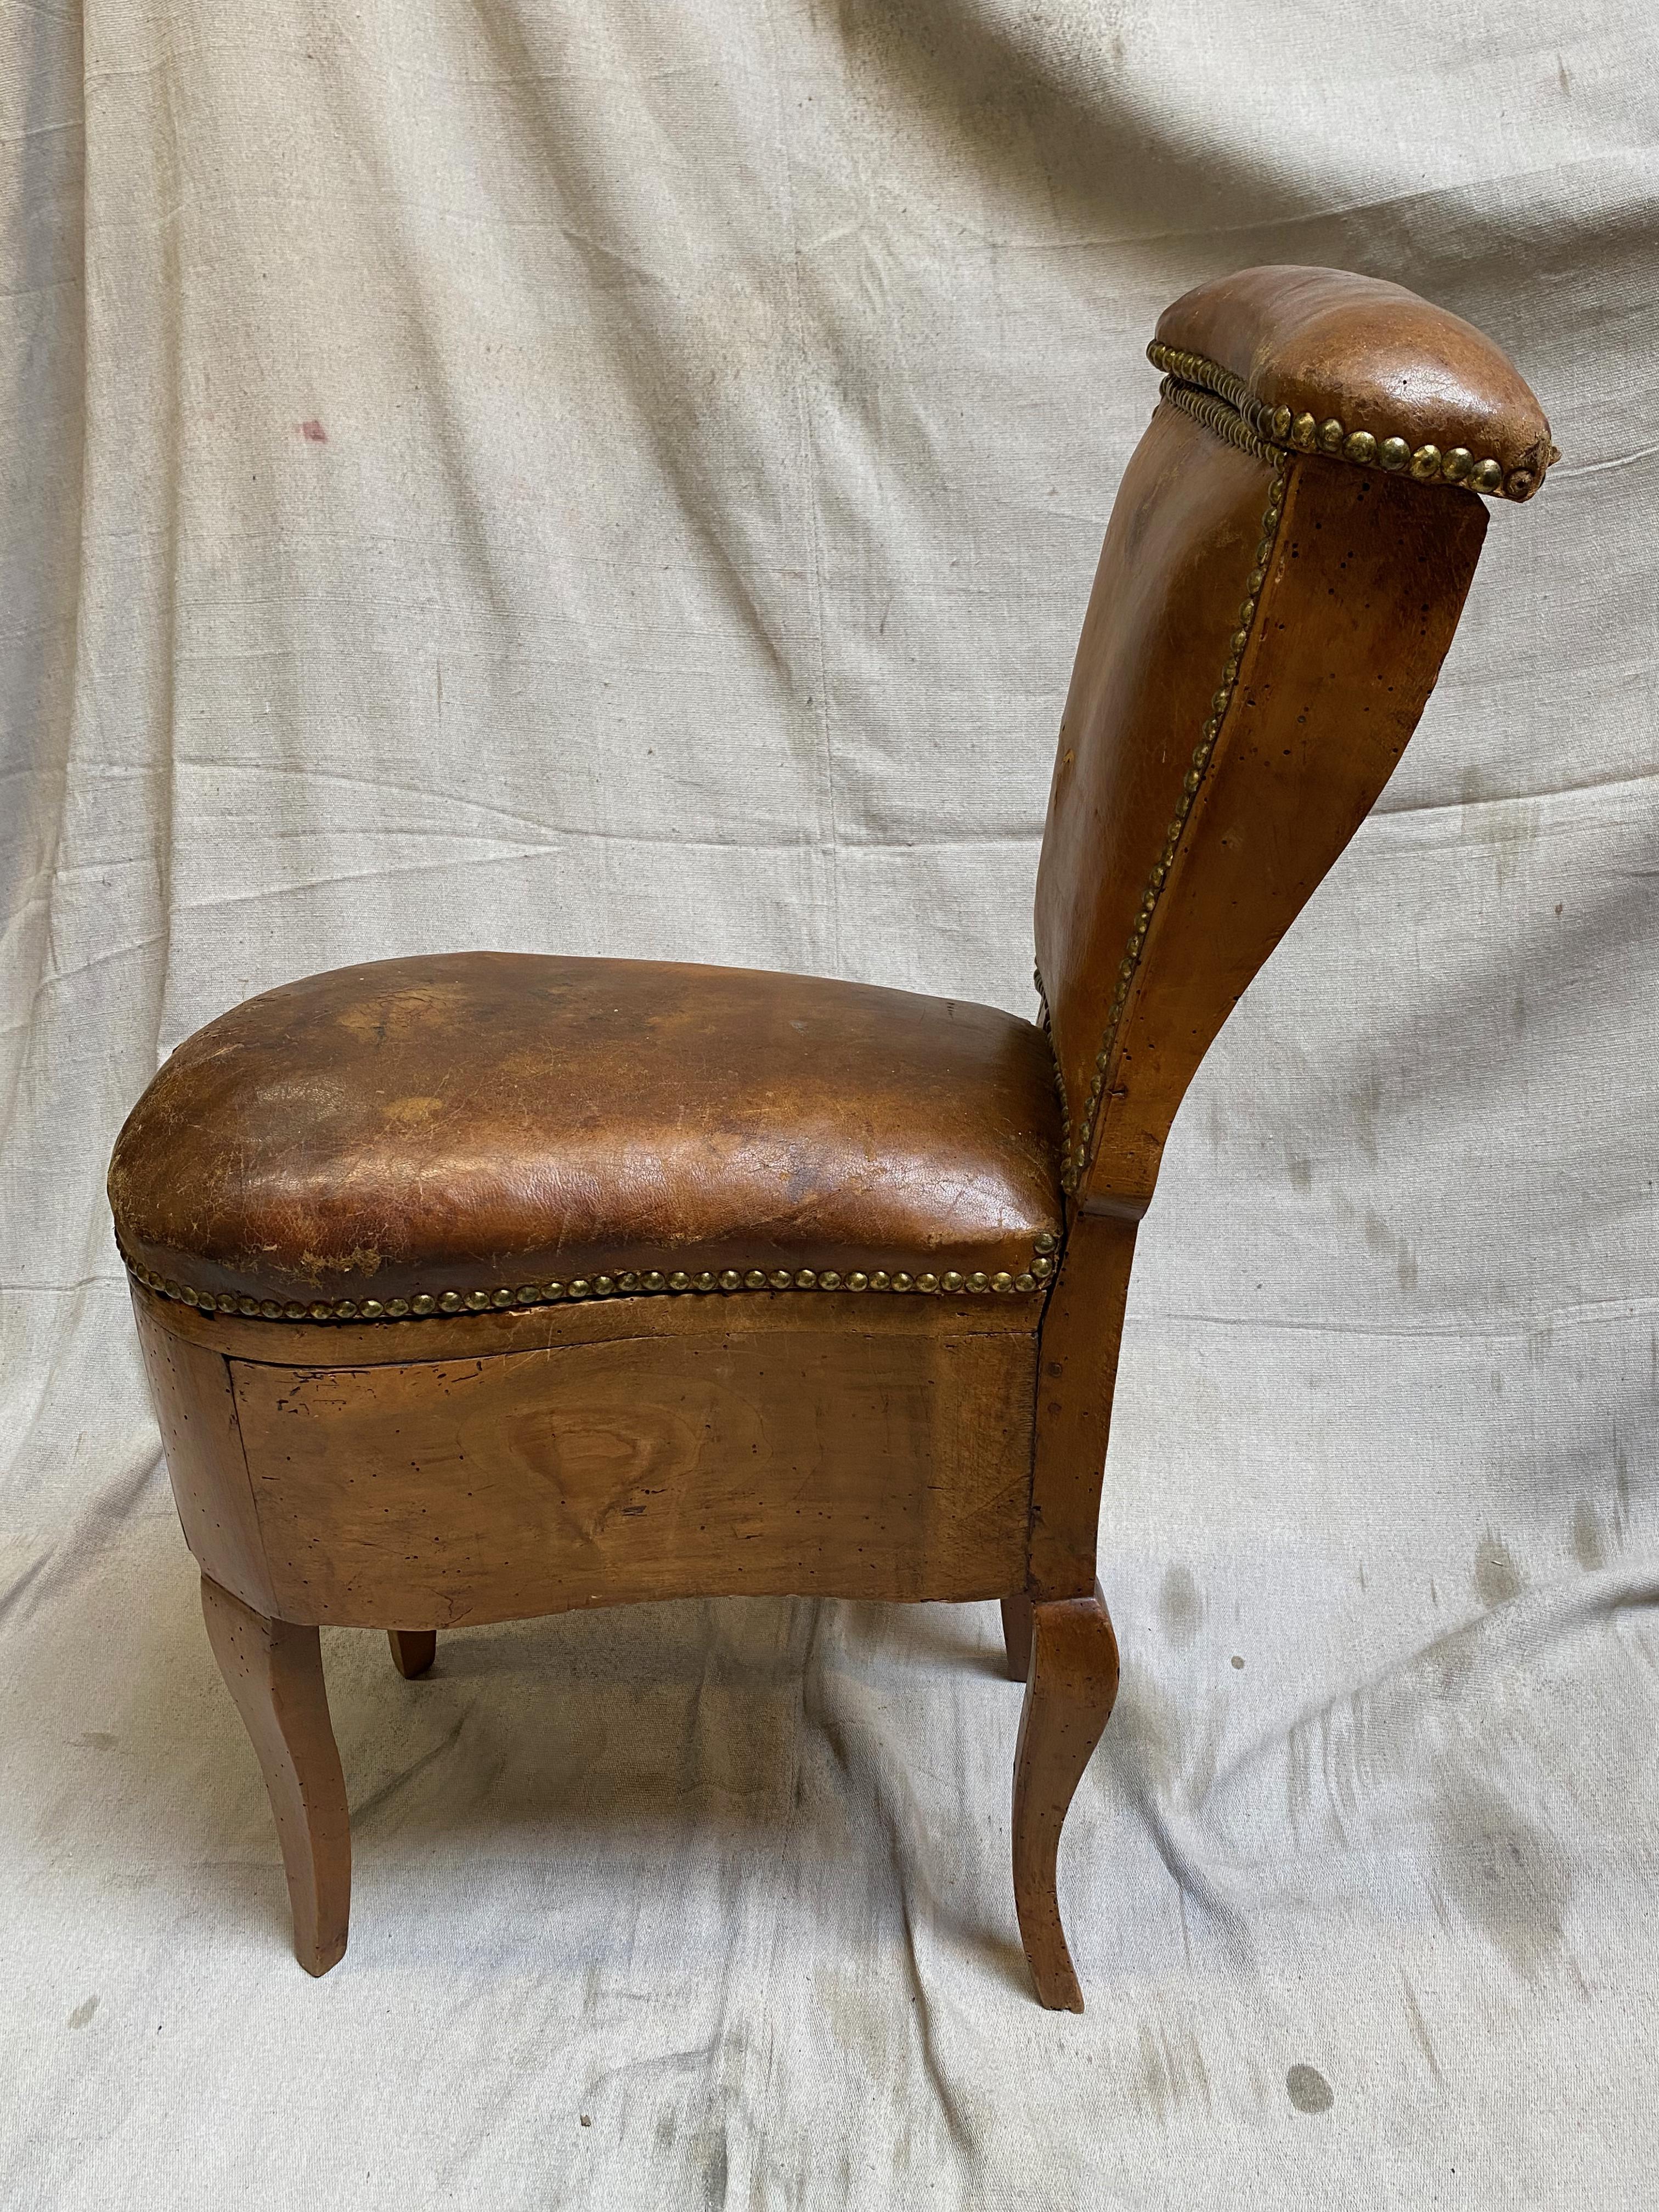 antique wooden commode chair